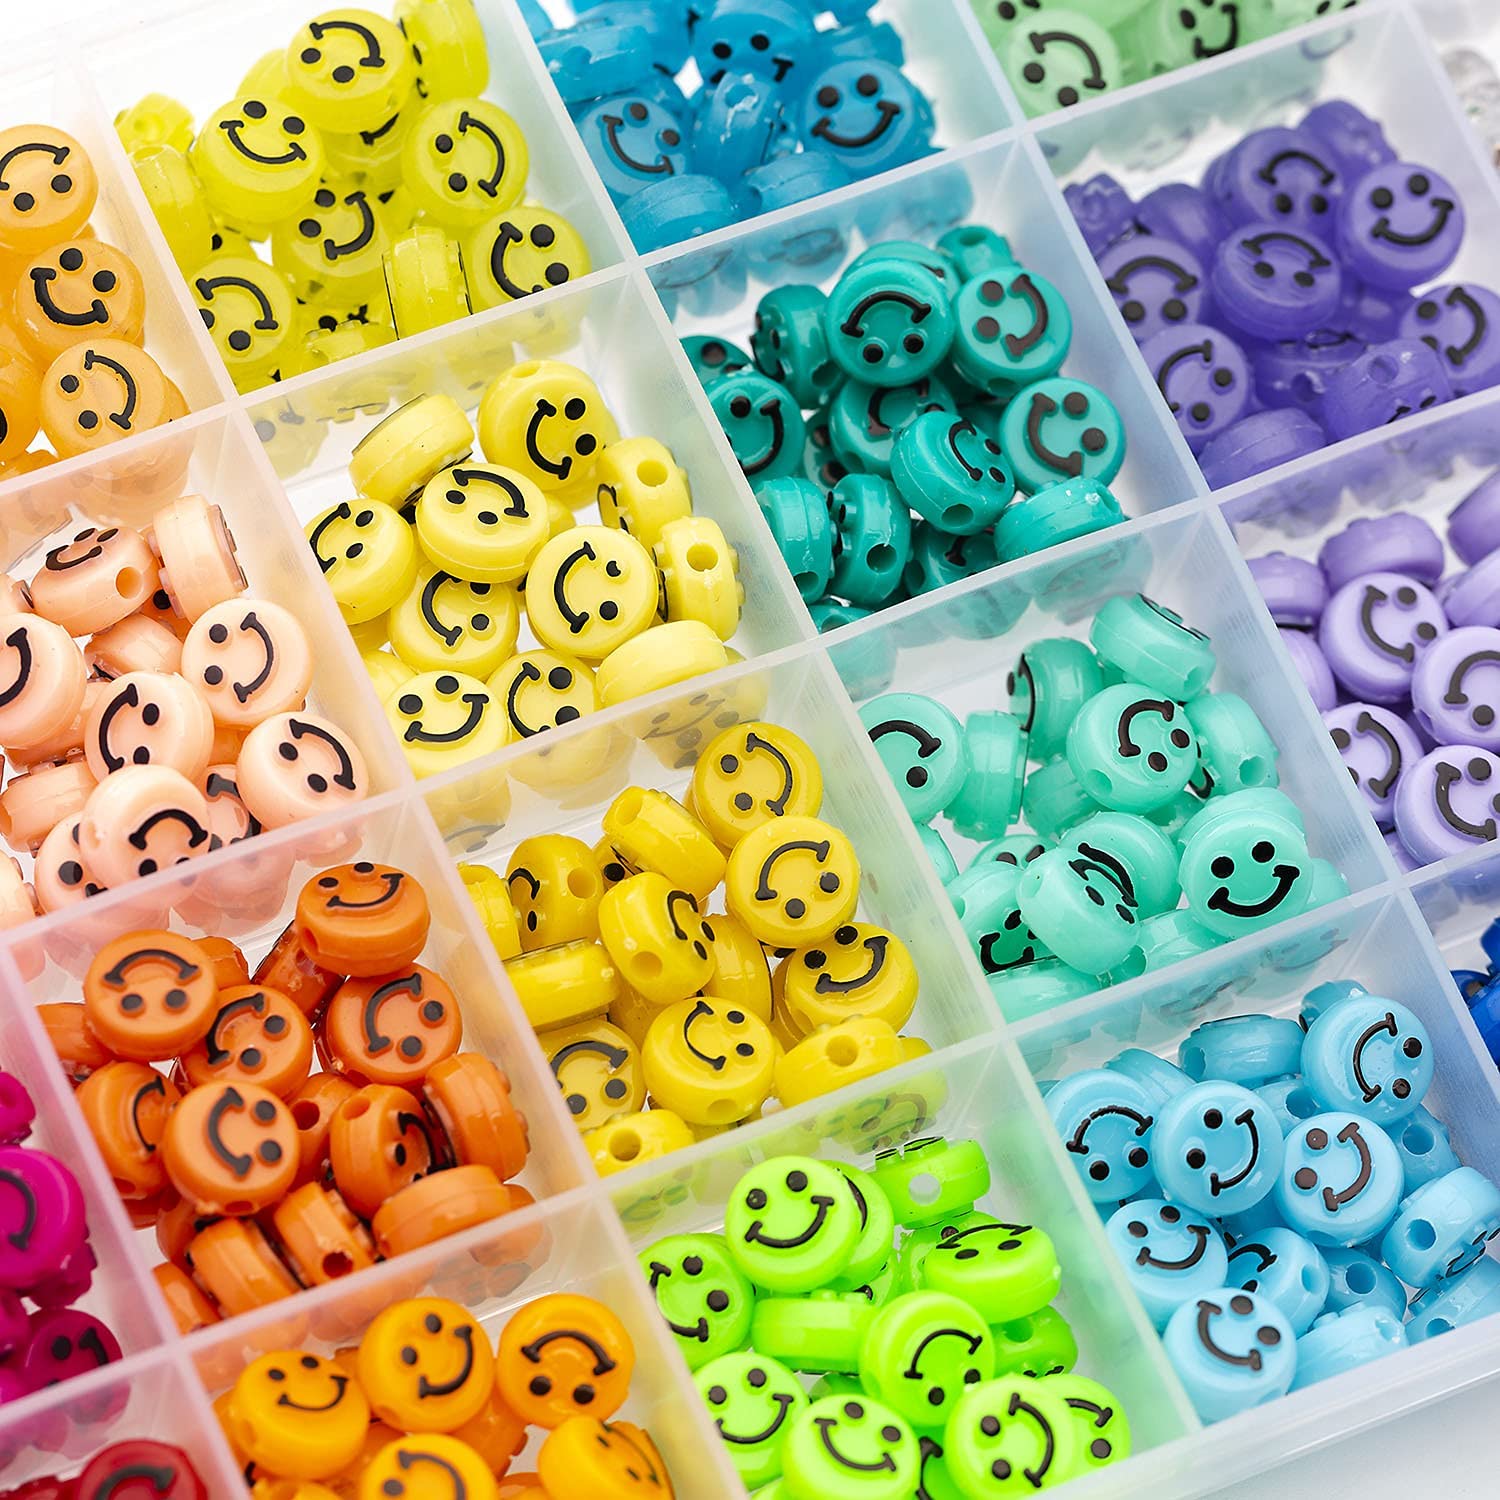 200pcs Mixed Fruit Spacer Beads Smiley Face Beads Color Polymer